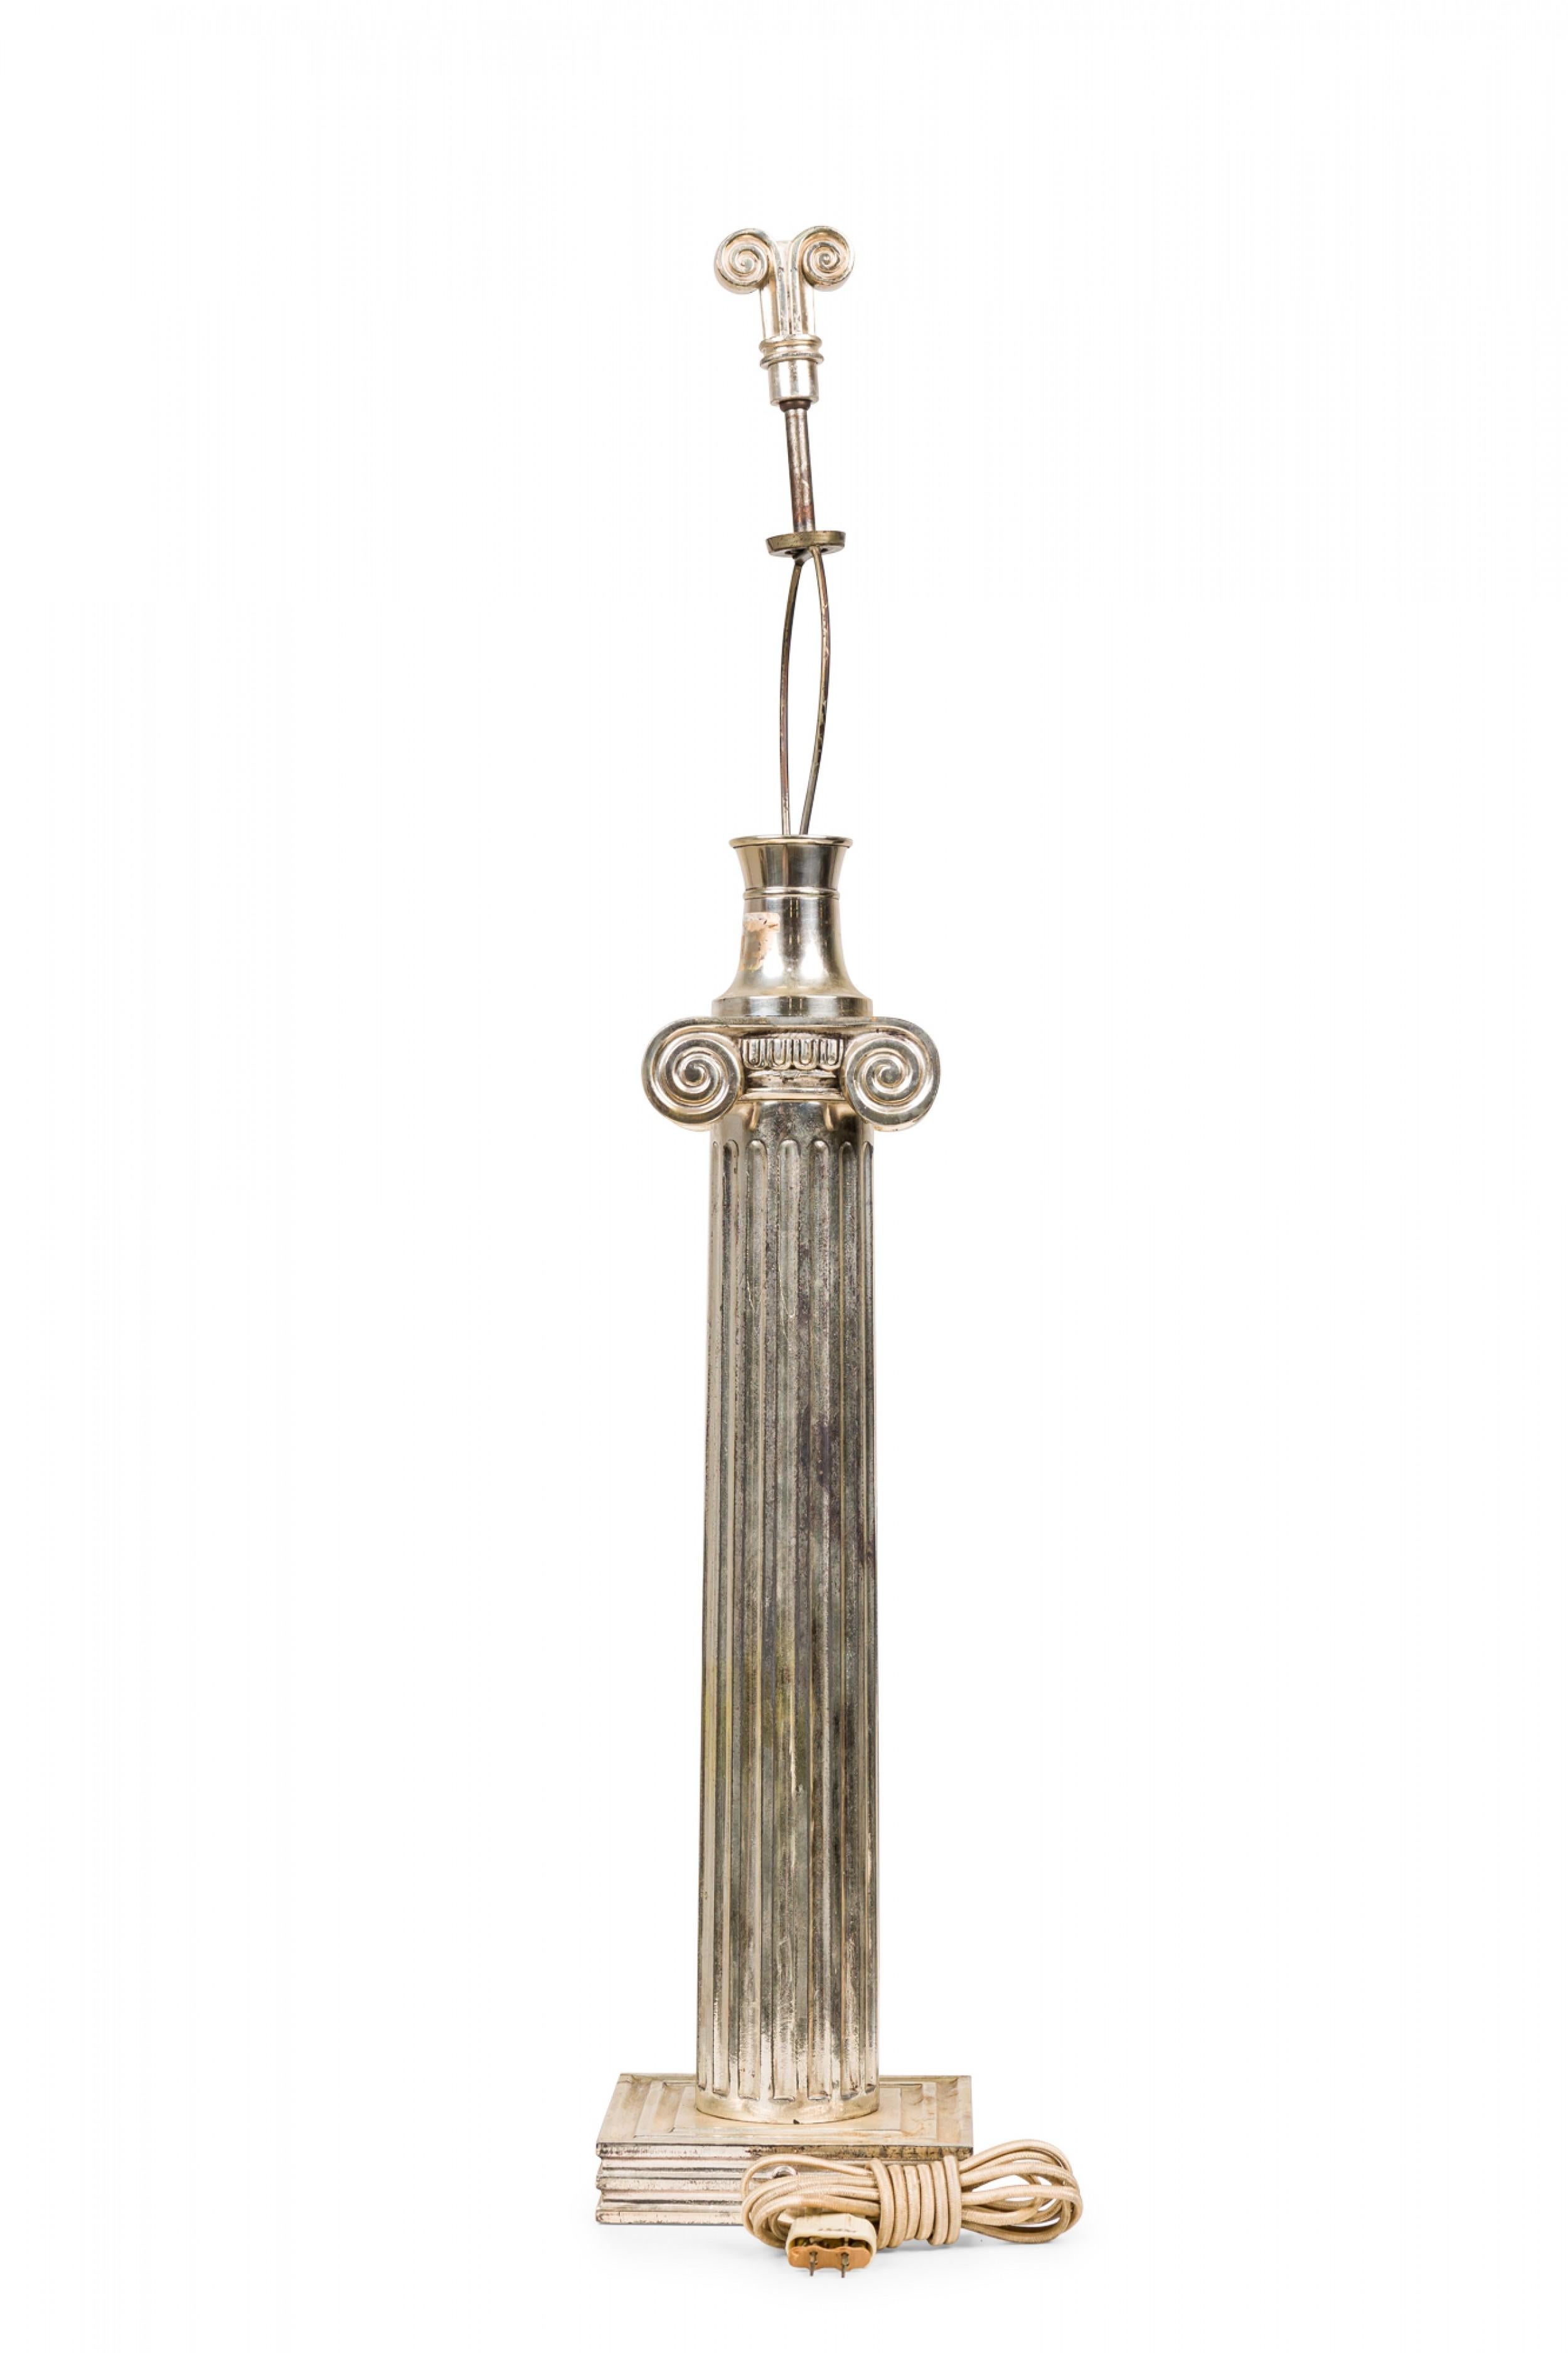 20th Century Pair of Midcentury American Silver Plate Ionic Order Column Table Lamps For Sale